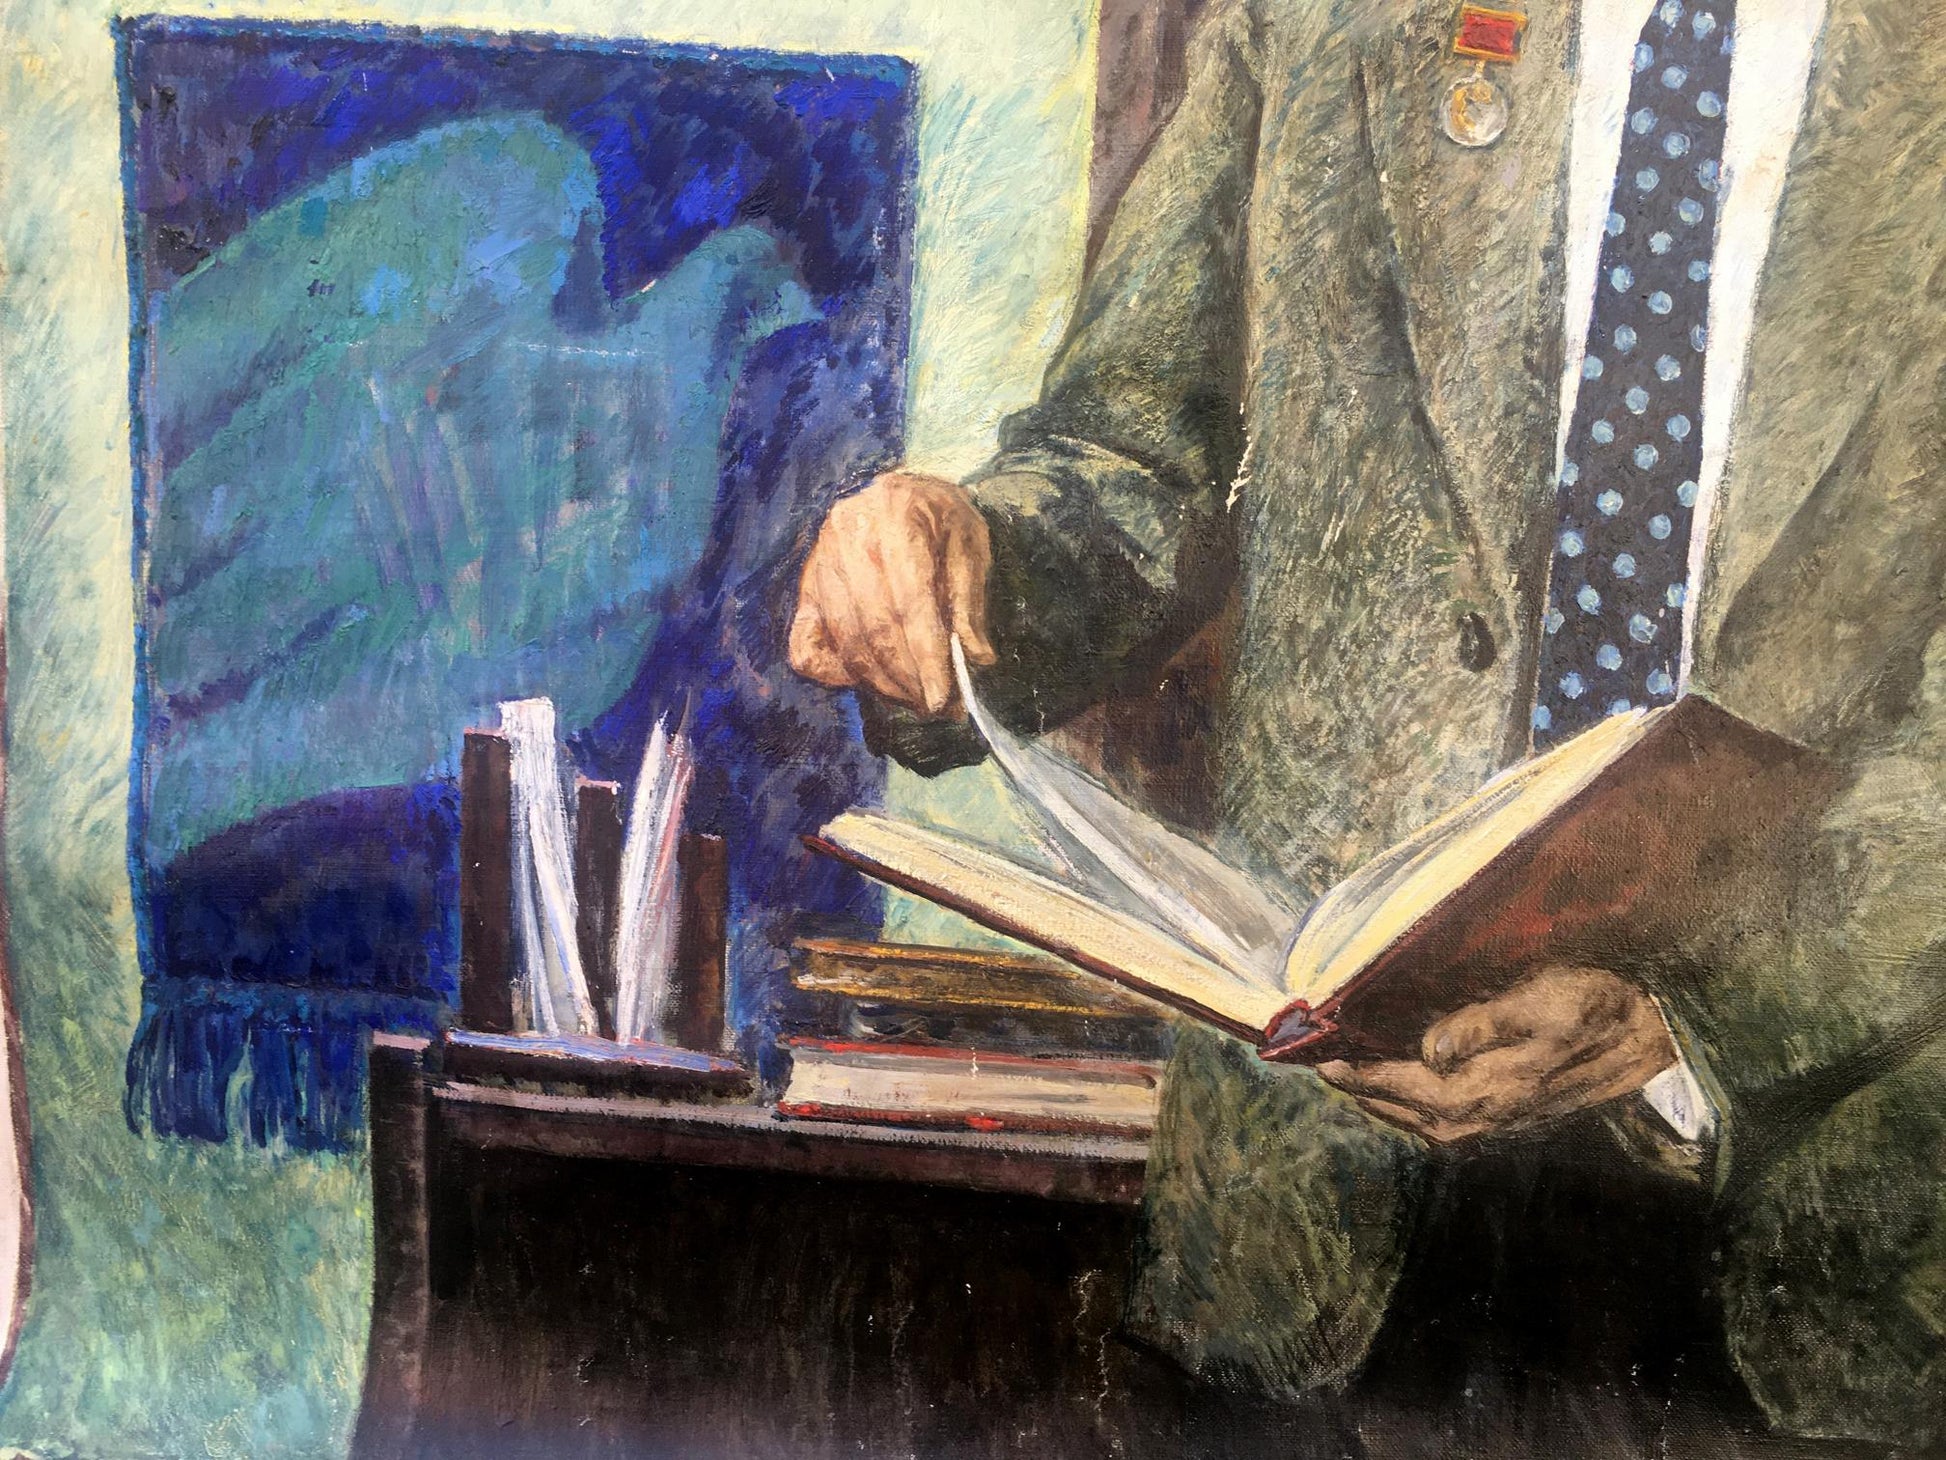 Nathan Rybak is depicted in an oil painting by Shostak David Zelmanovich